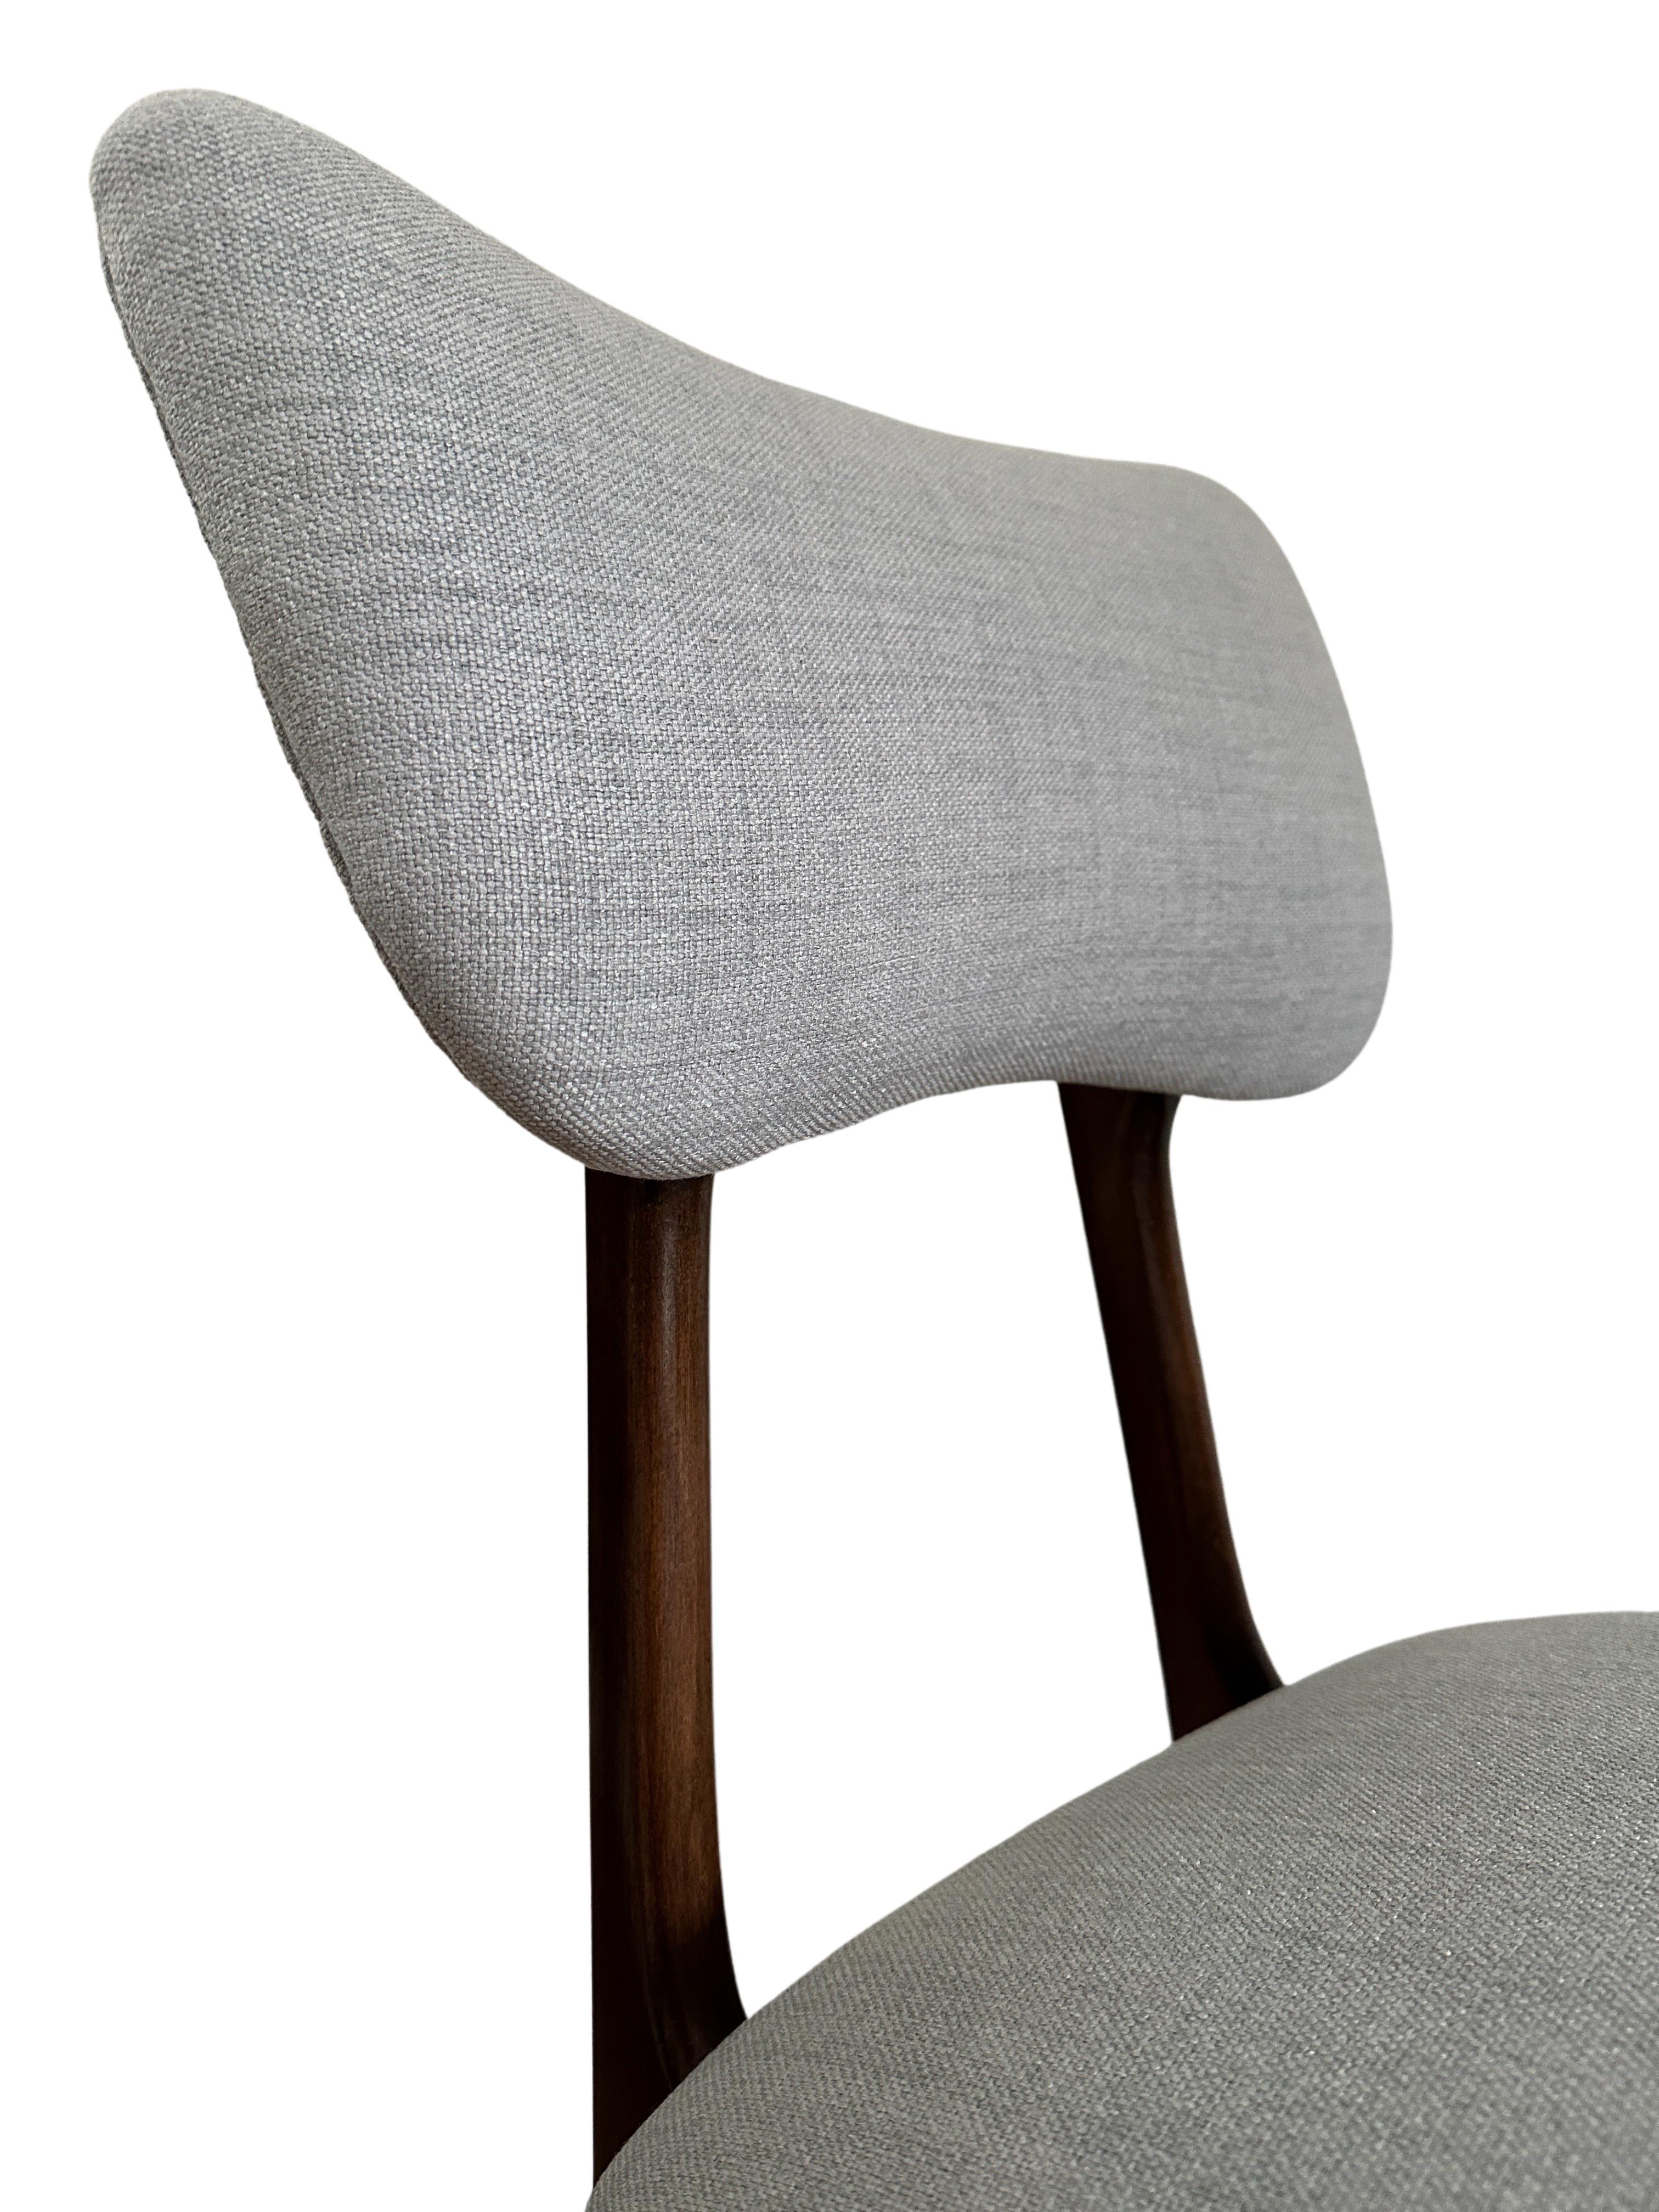 Polish Mid Century Wooden Dining Chair in Grey Upholstery, Poland, 1960s For Sale